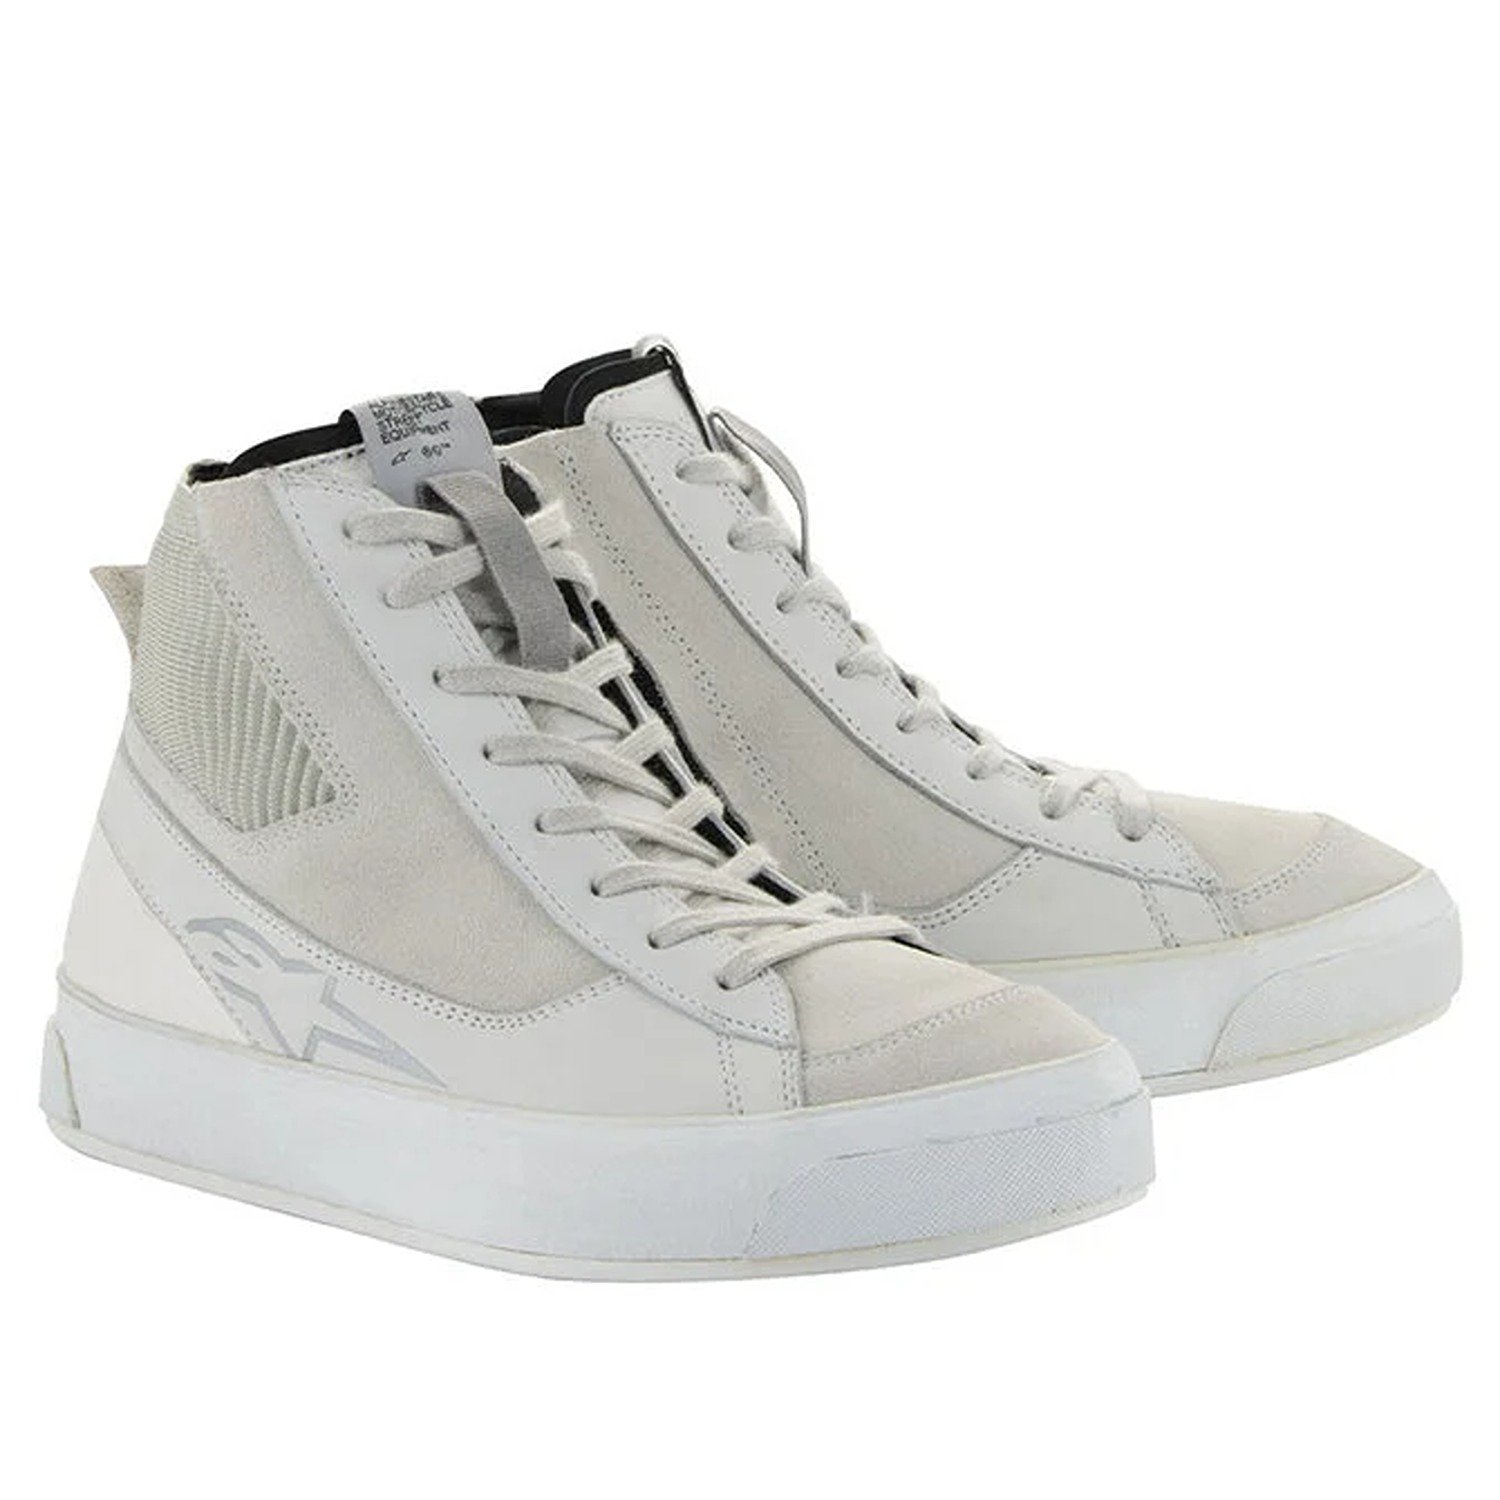 Image of Alpinestars Stated Shoes White Cool Gray Size US 11 EN